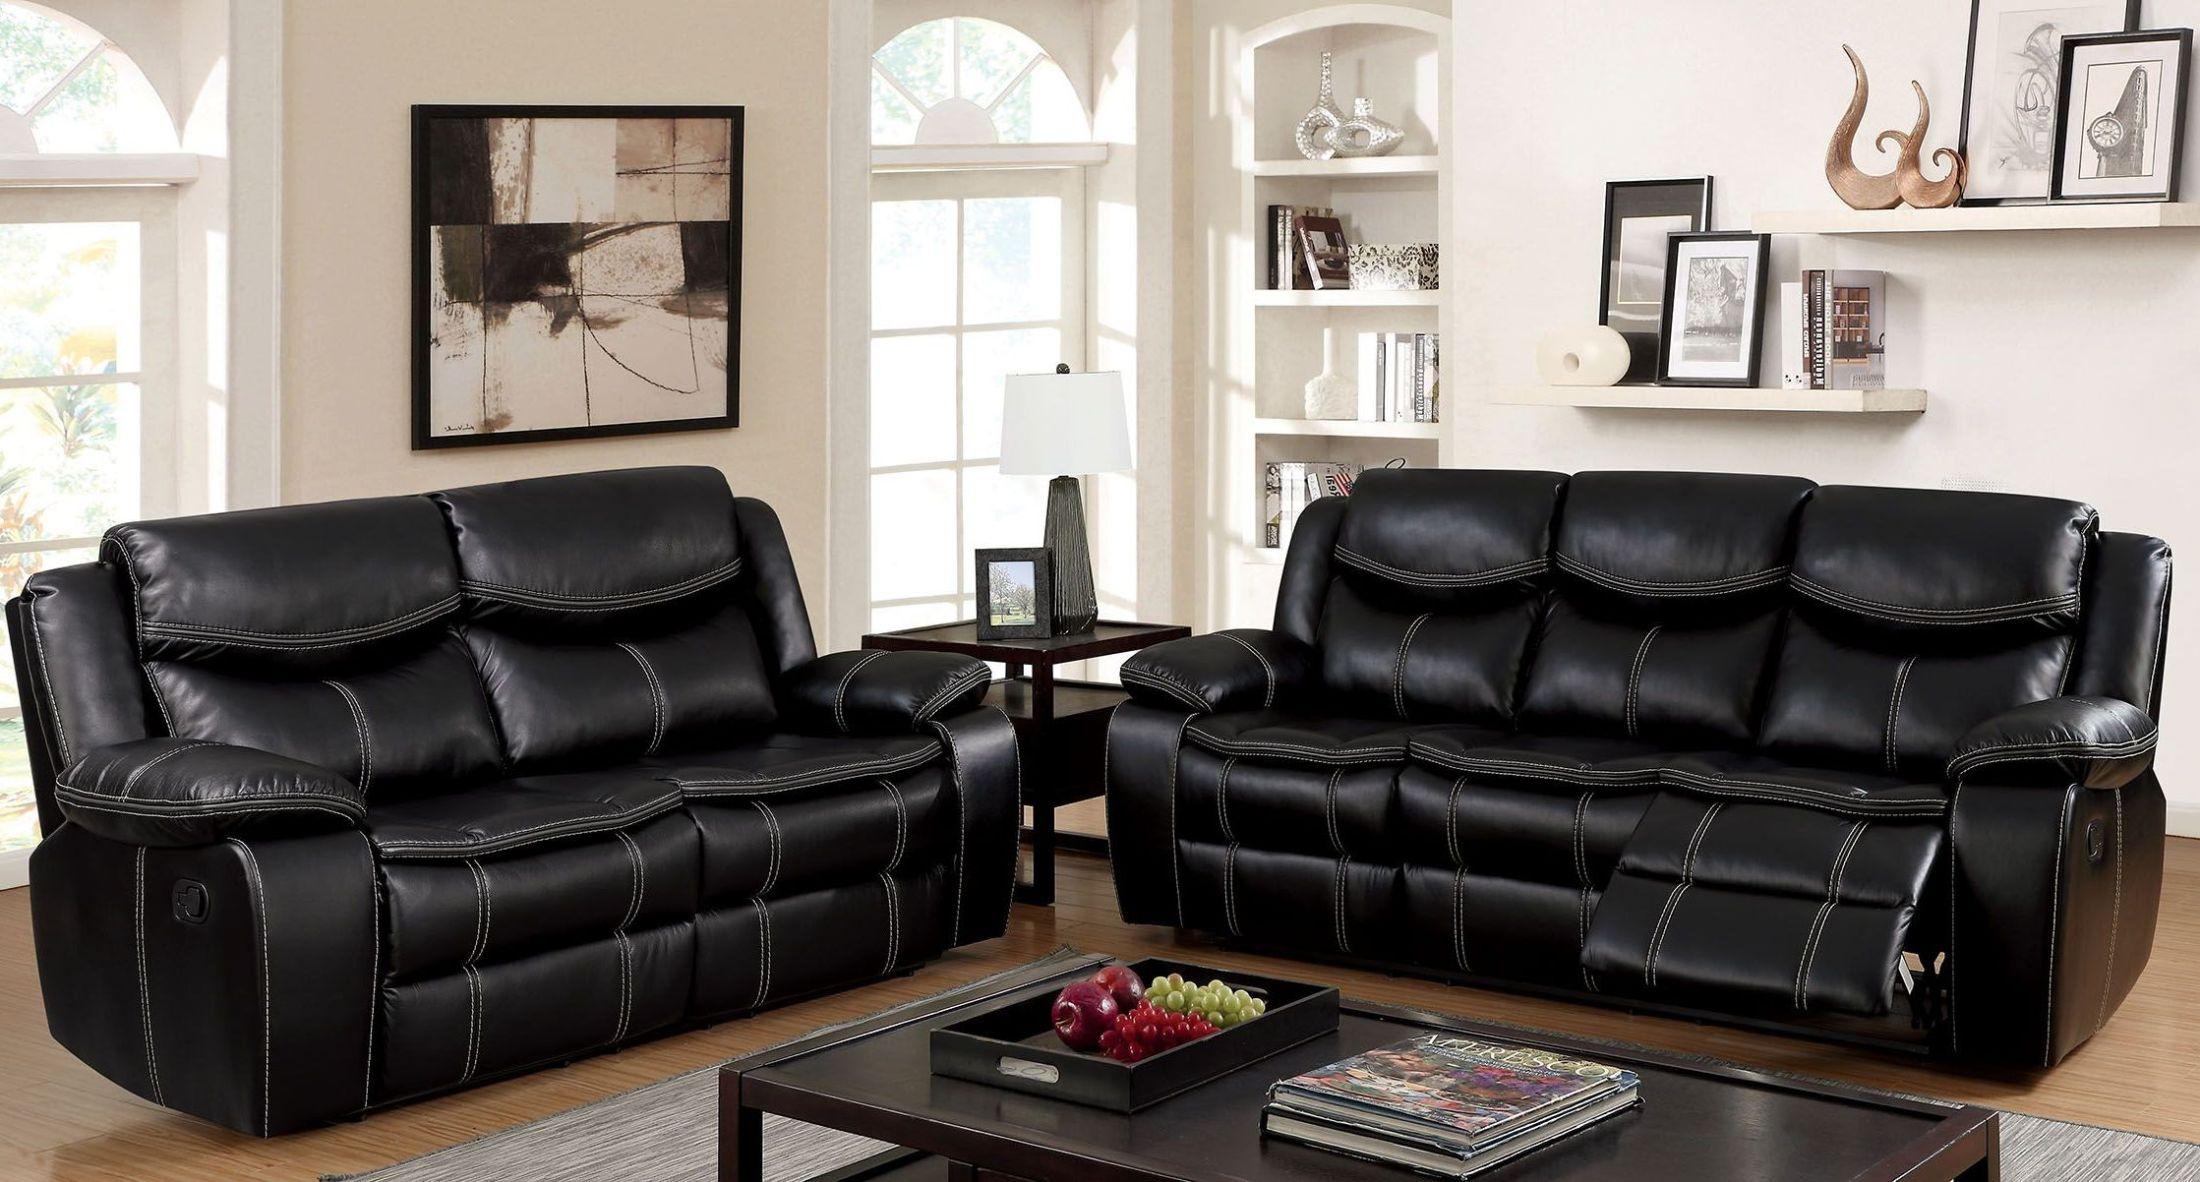 Transitional Reclining Living Room Set CM6981-3PC Pollux CM6981-3PC in Black 